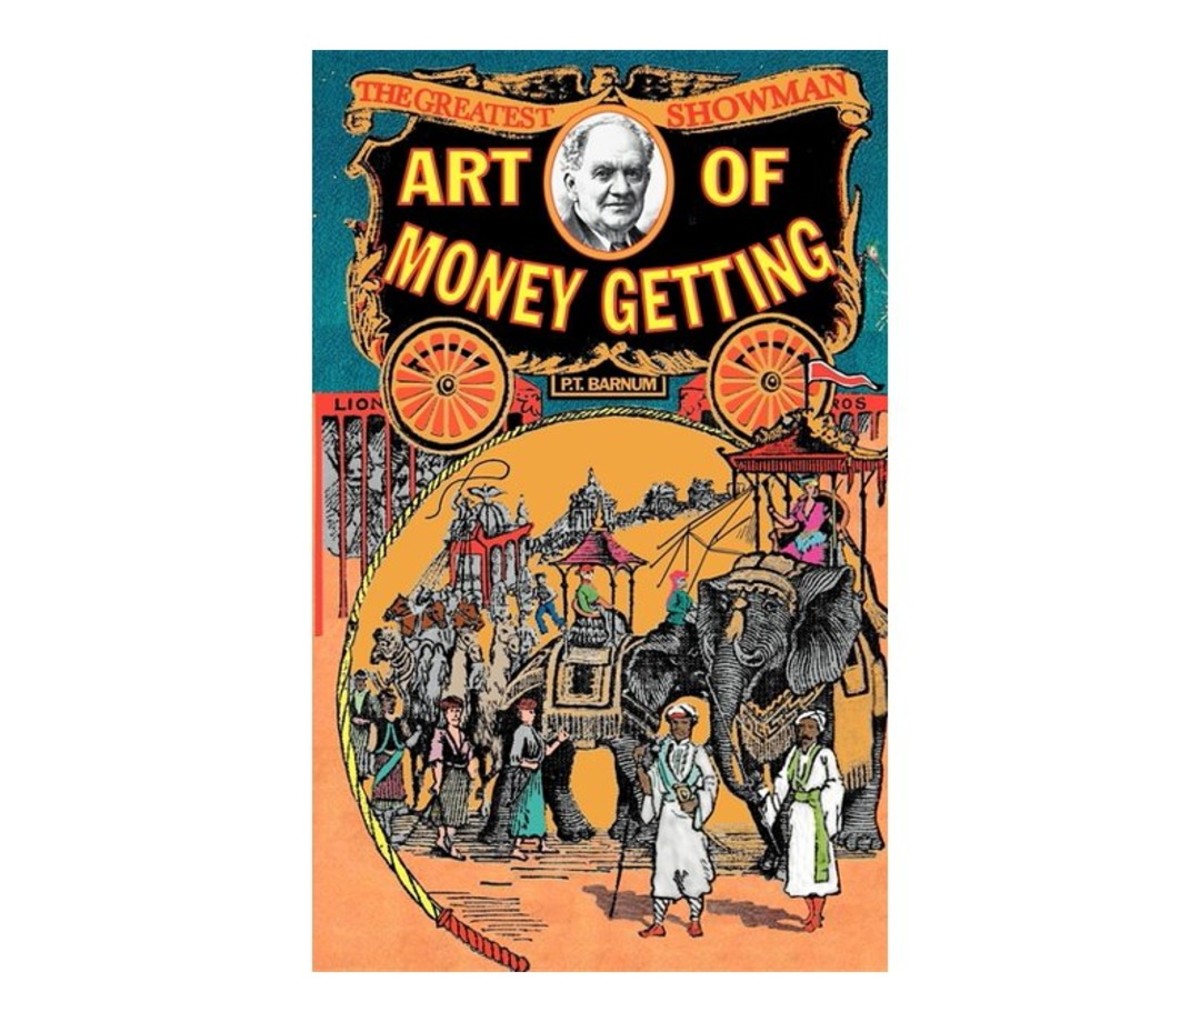 The Art of Money Getting by P.T. Barnum